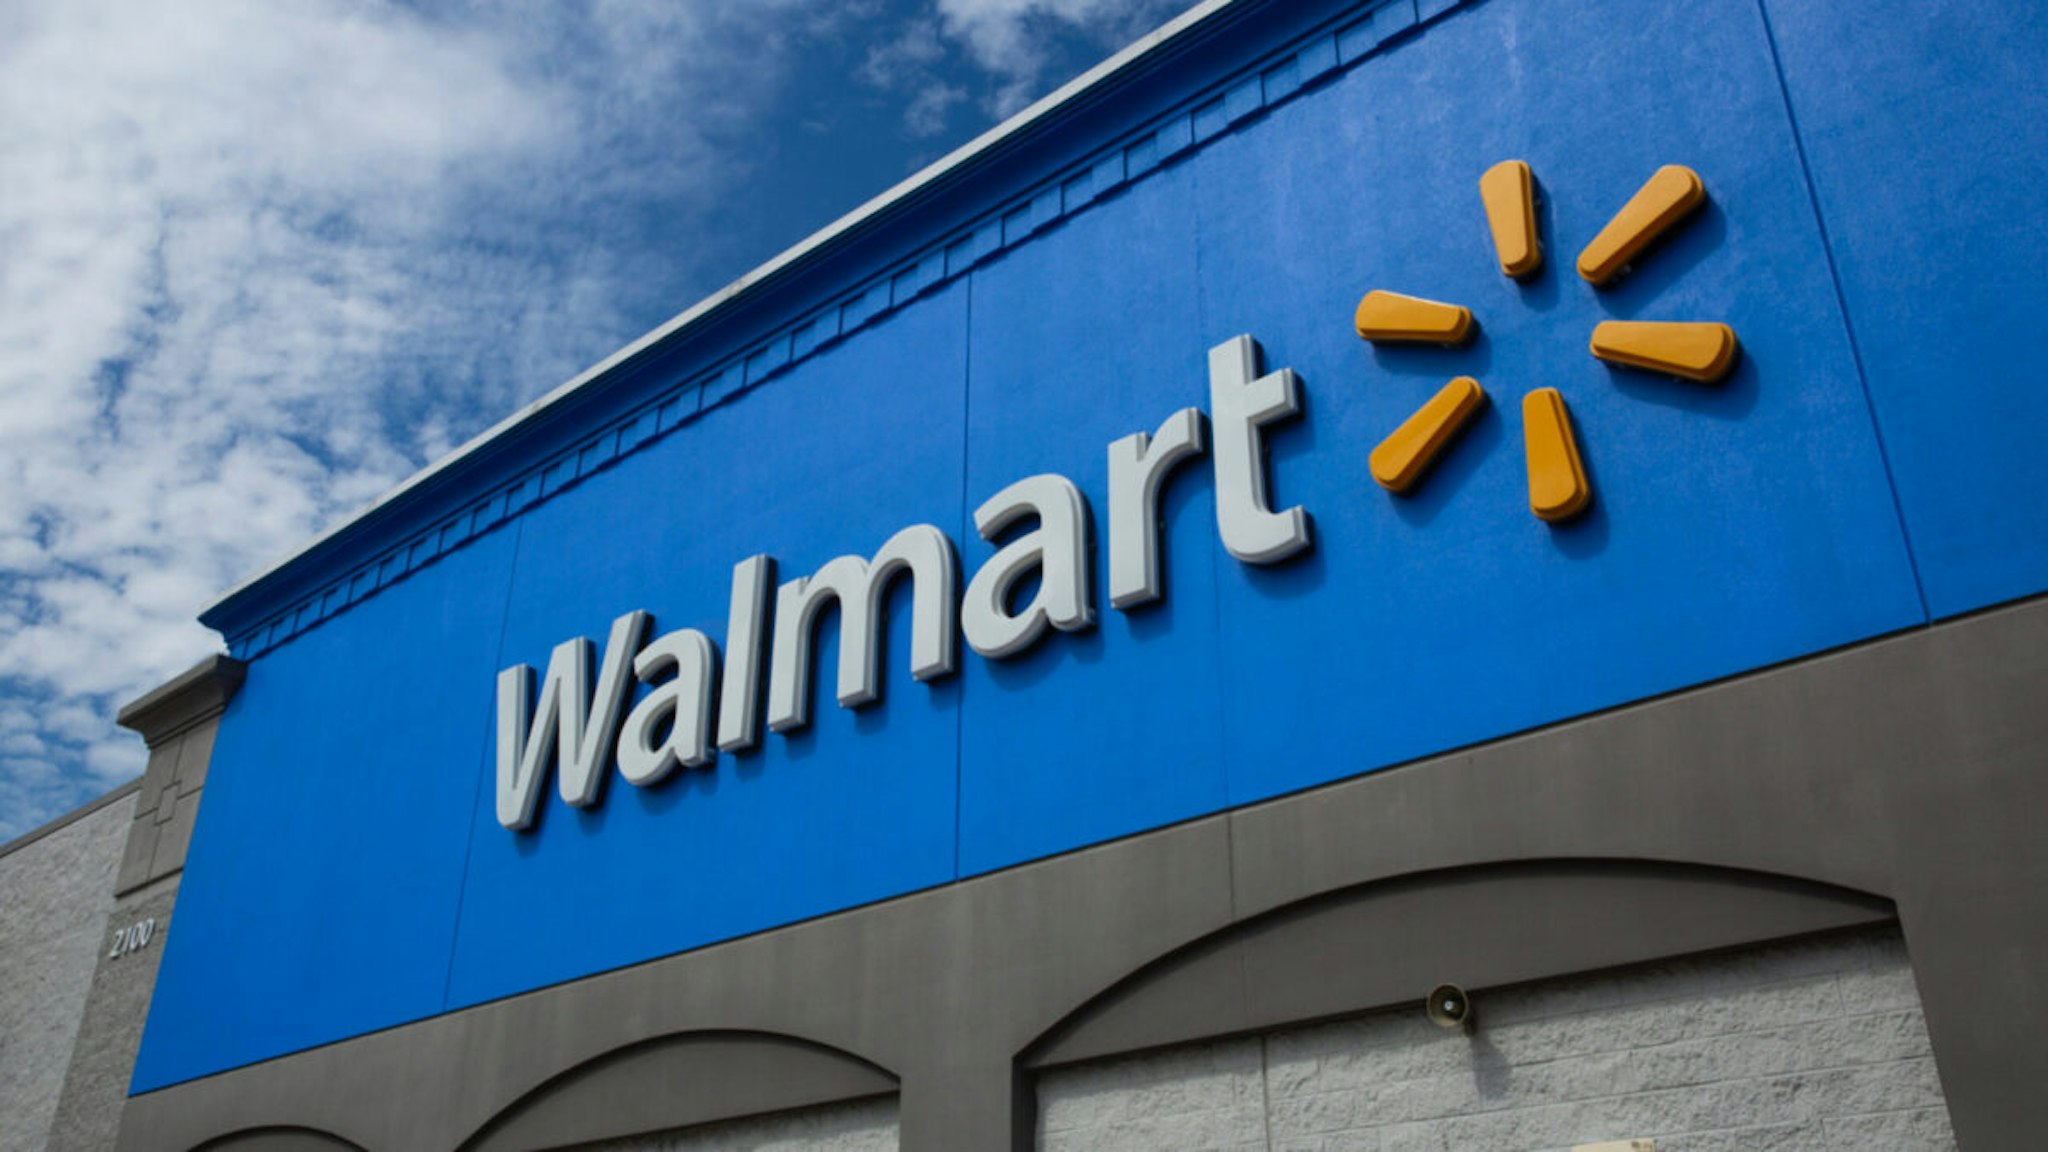 Exterior view of a Walmart store on August 23, 2020 in North Bergen, New Jersey.